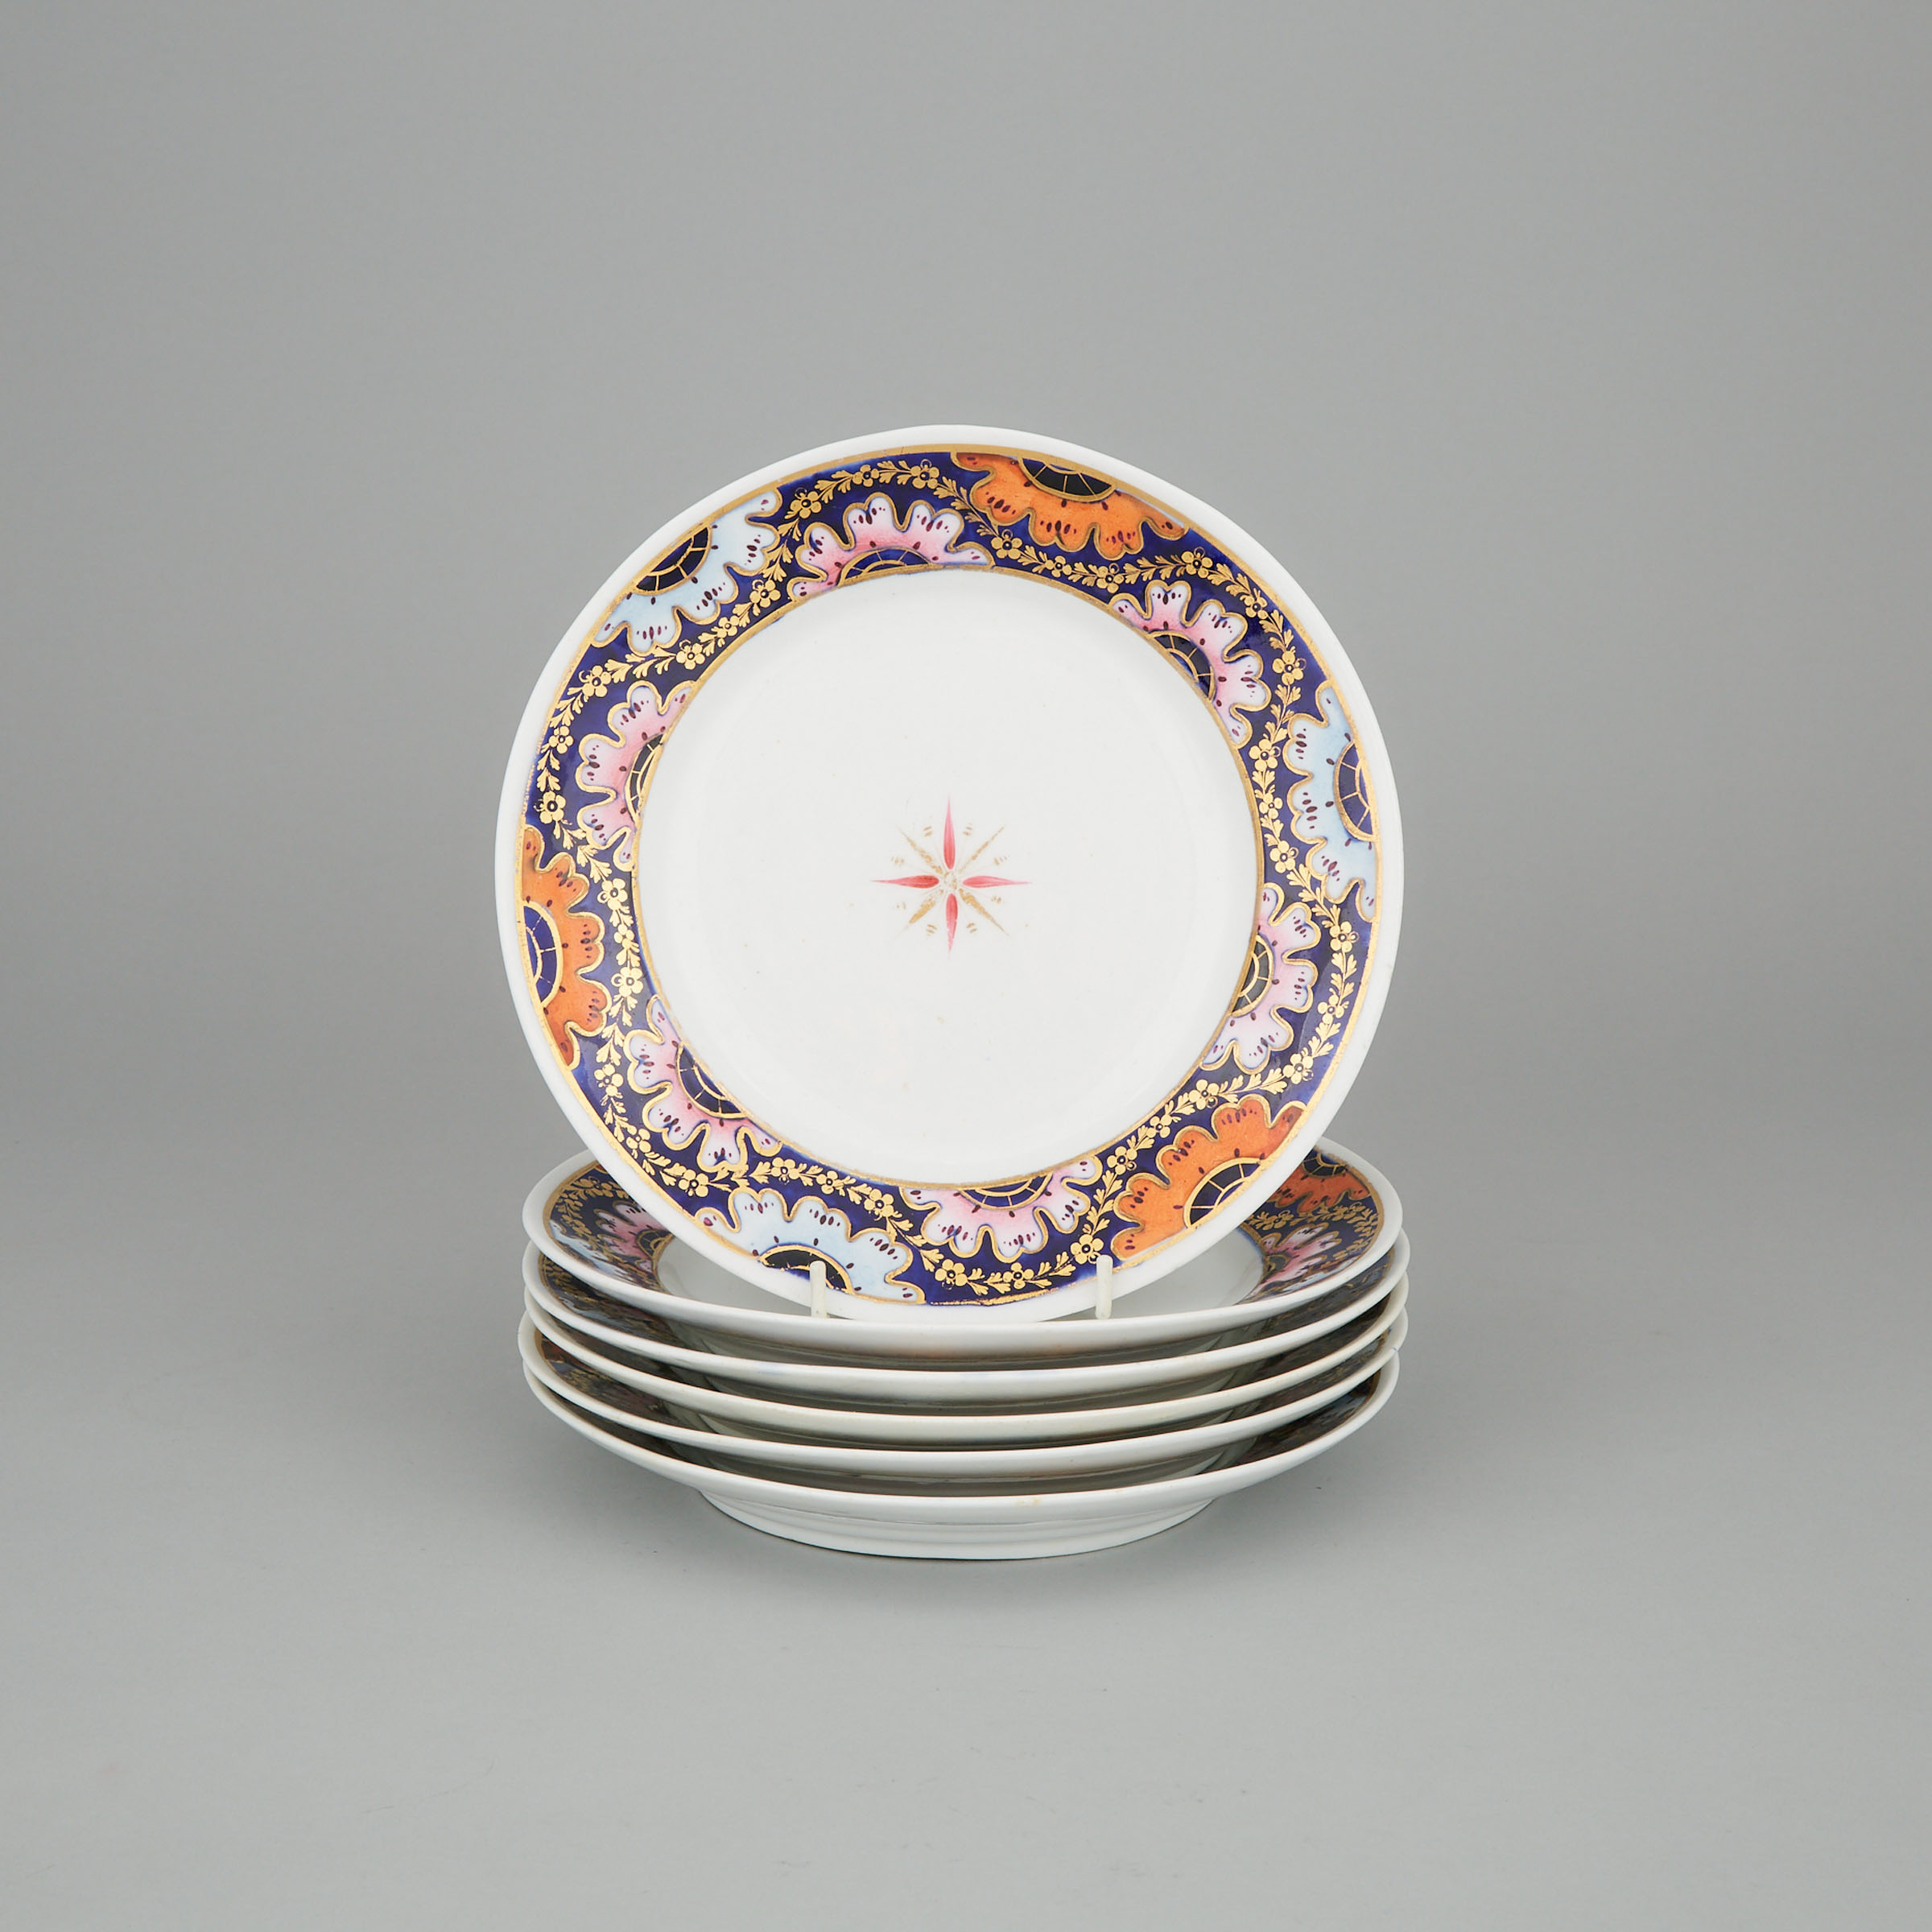 Six Derby Plates, early 19th century